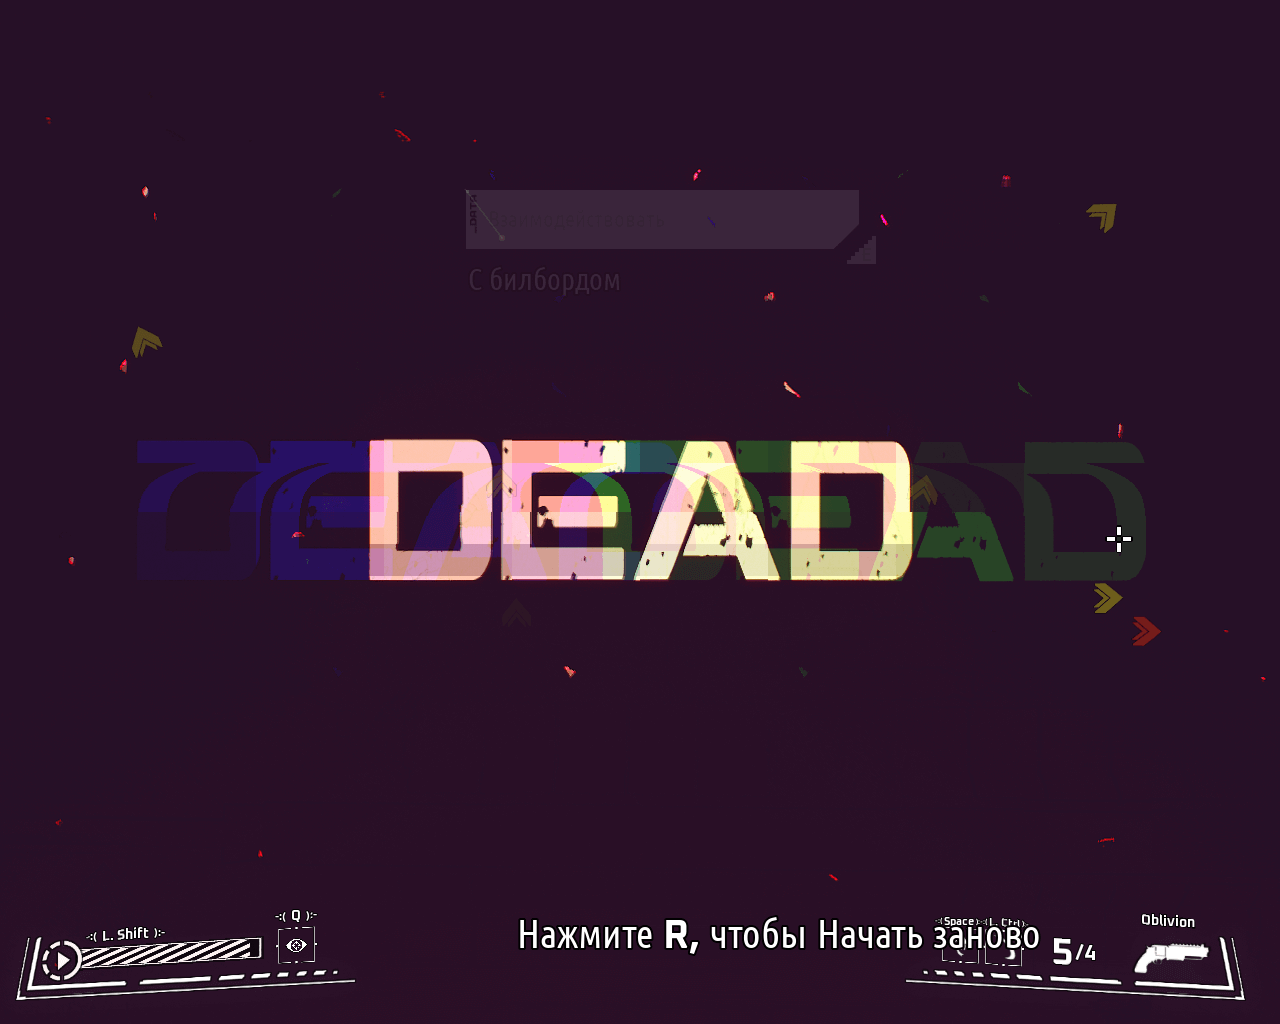 We will have to see this inscription hundreds, if not thousands, of times. In terms of difficulty Esse Proxy is just as good as Hotline Miami.